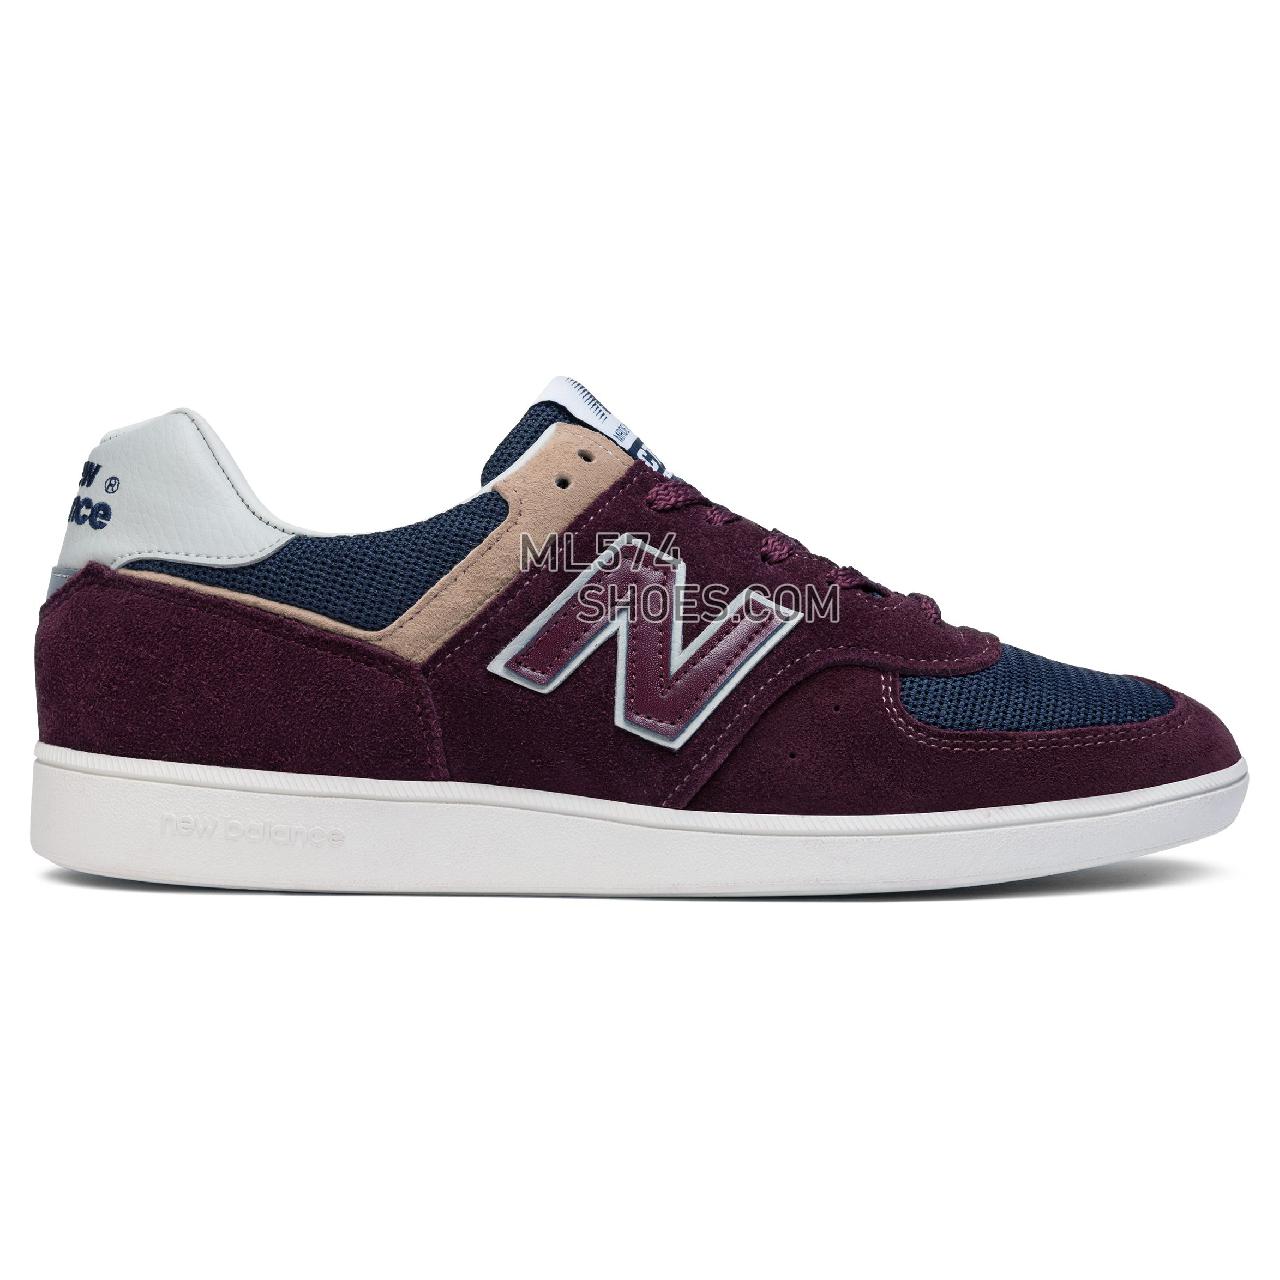 New Balance CT576 - Men's CT576 Sport Classic - Port Royale with Outerspace - CT576OBN